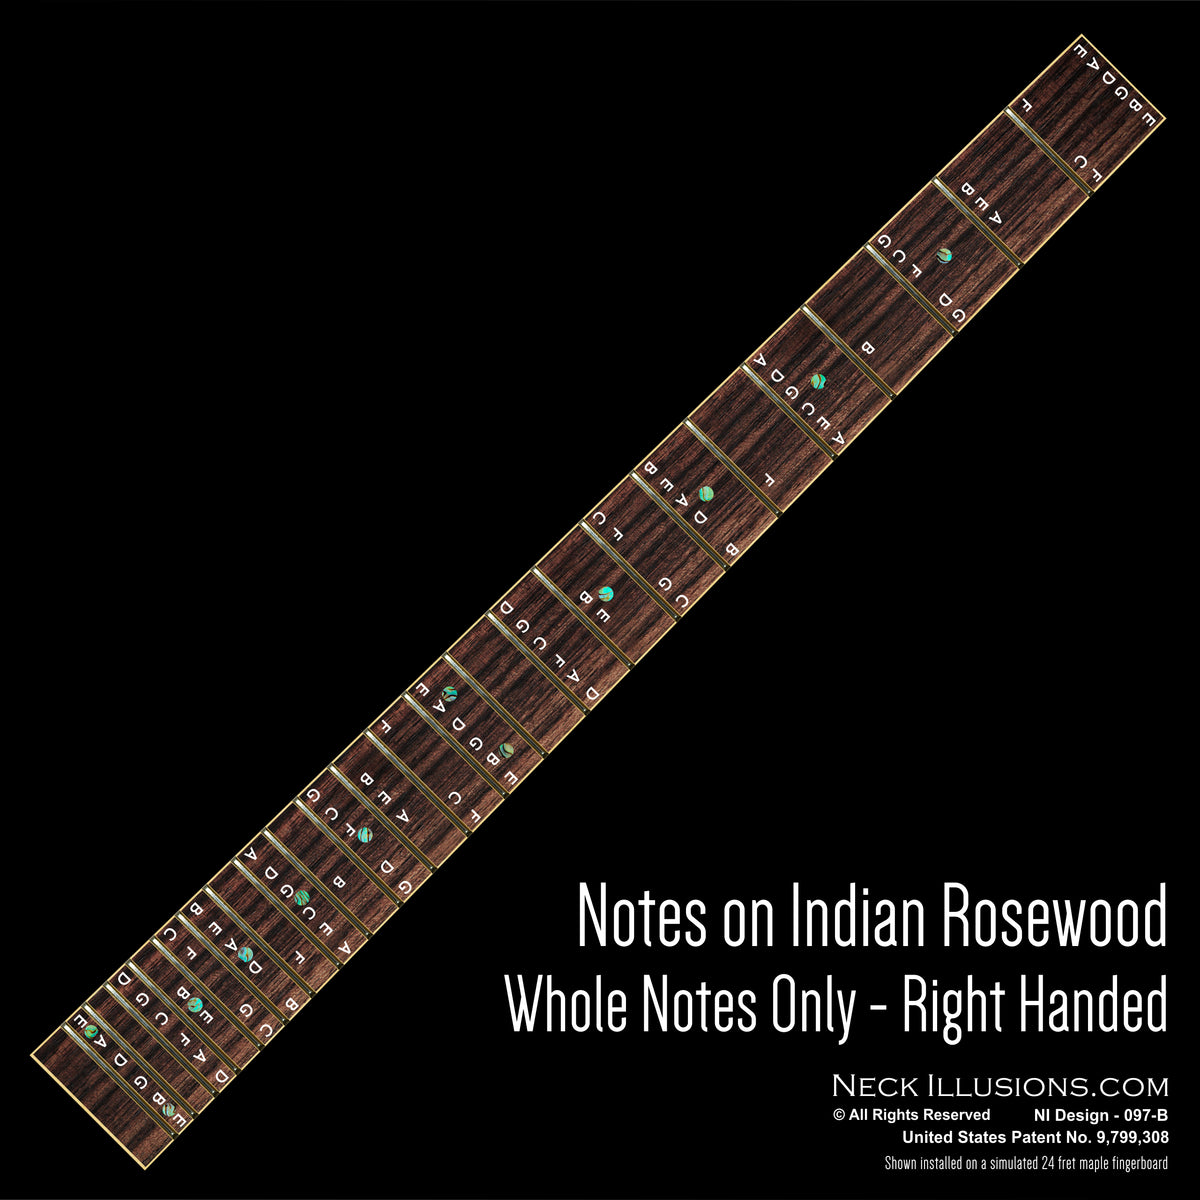 Notes on Indian Rosewood